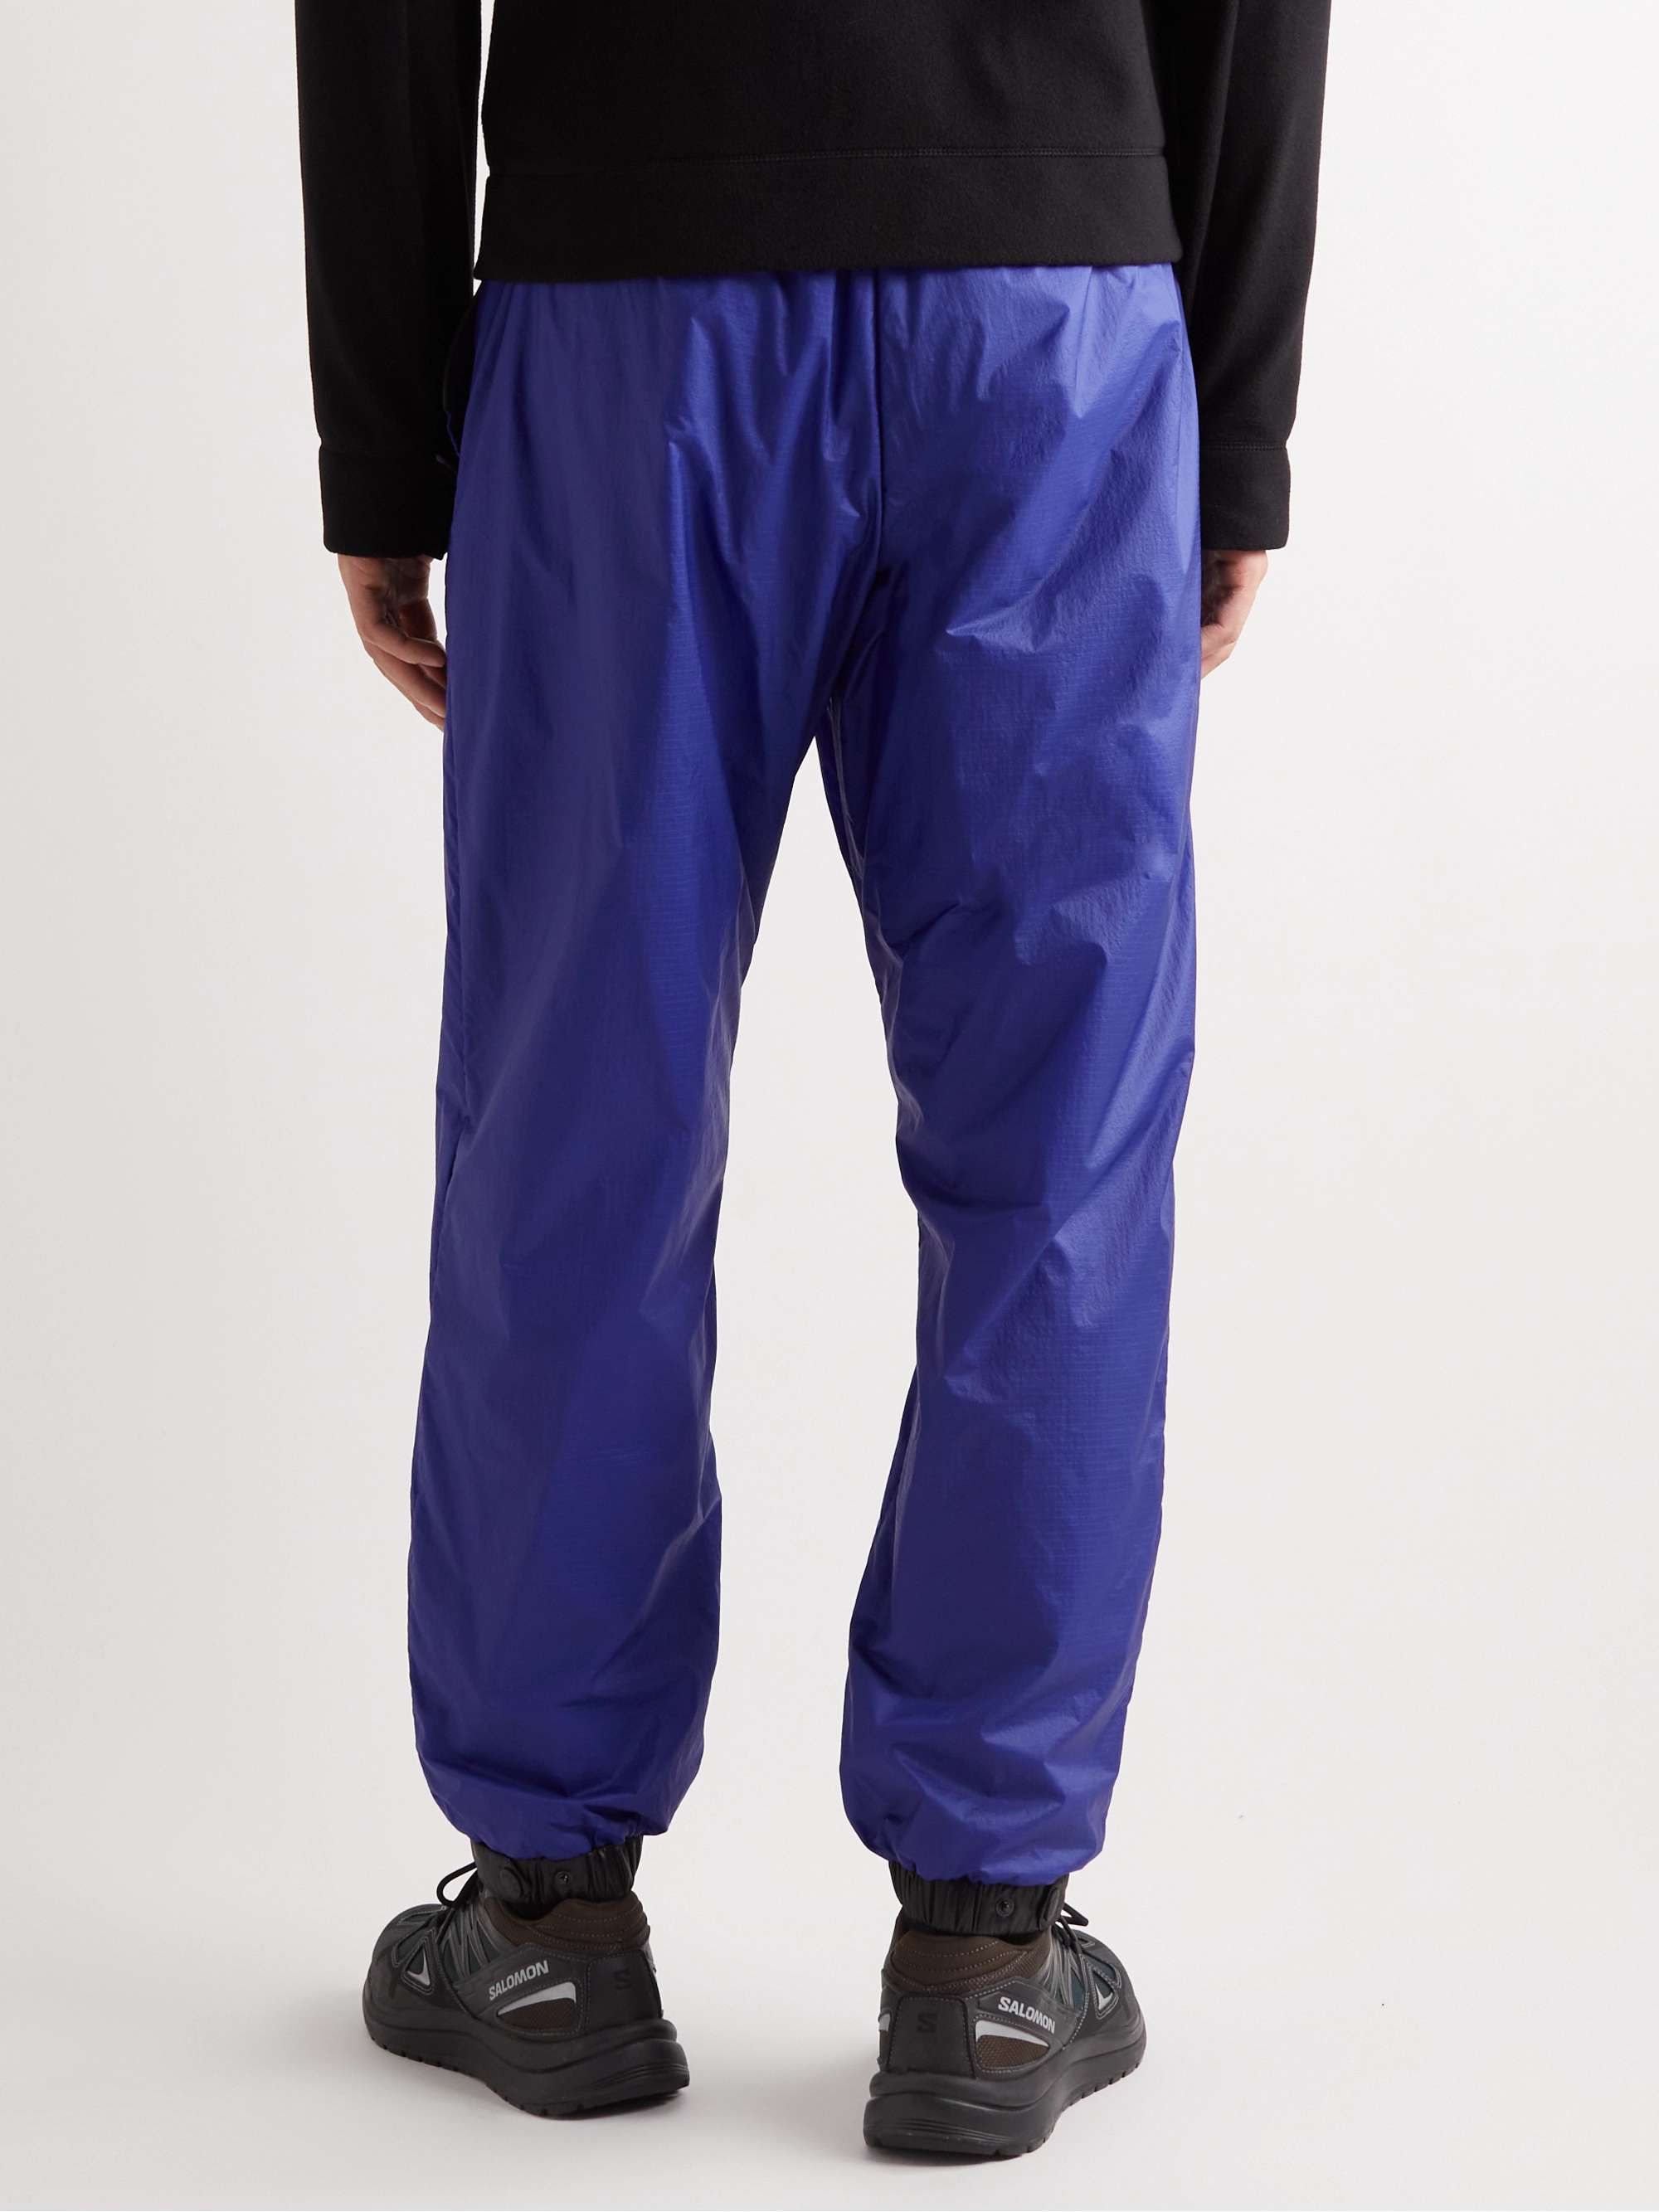 MONCLER GRENOBLE Tapered Ripstop Sweatpants